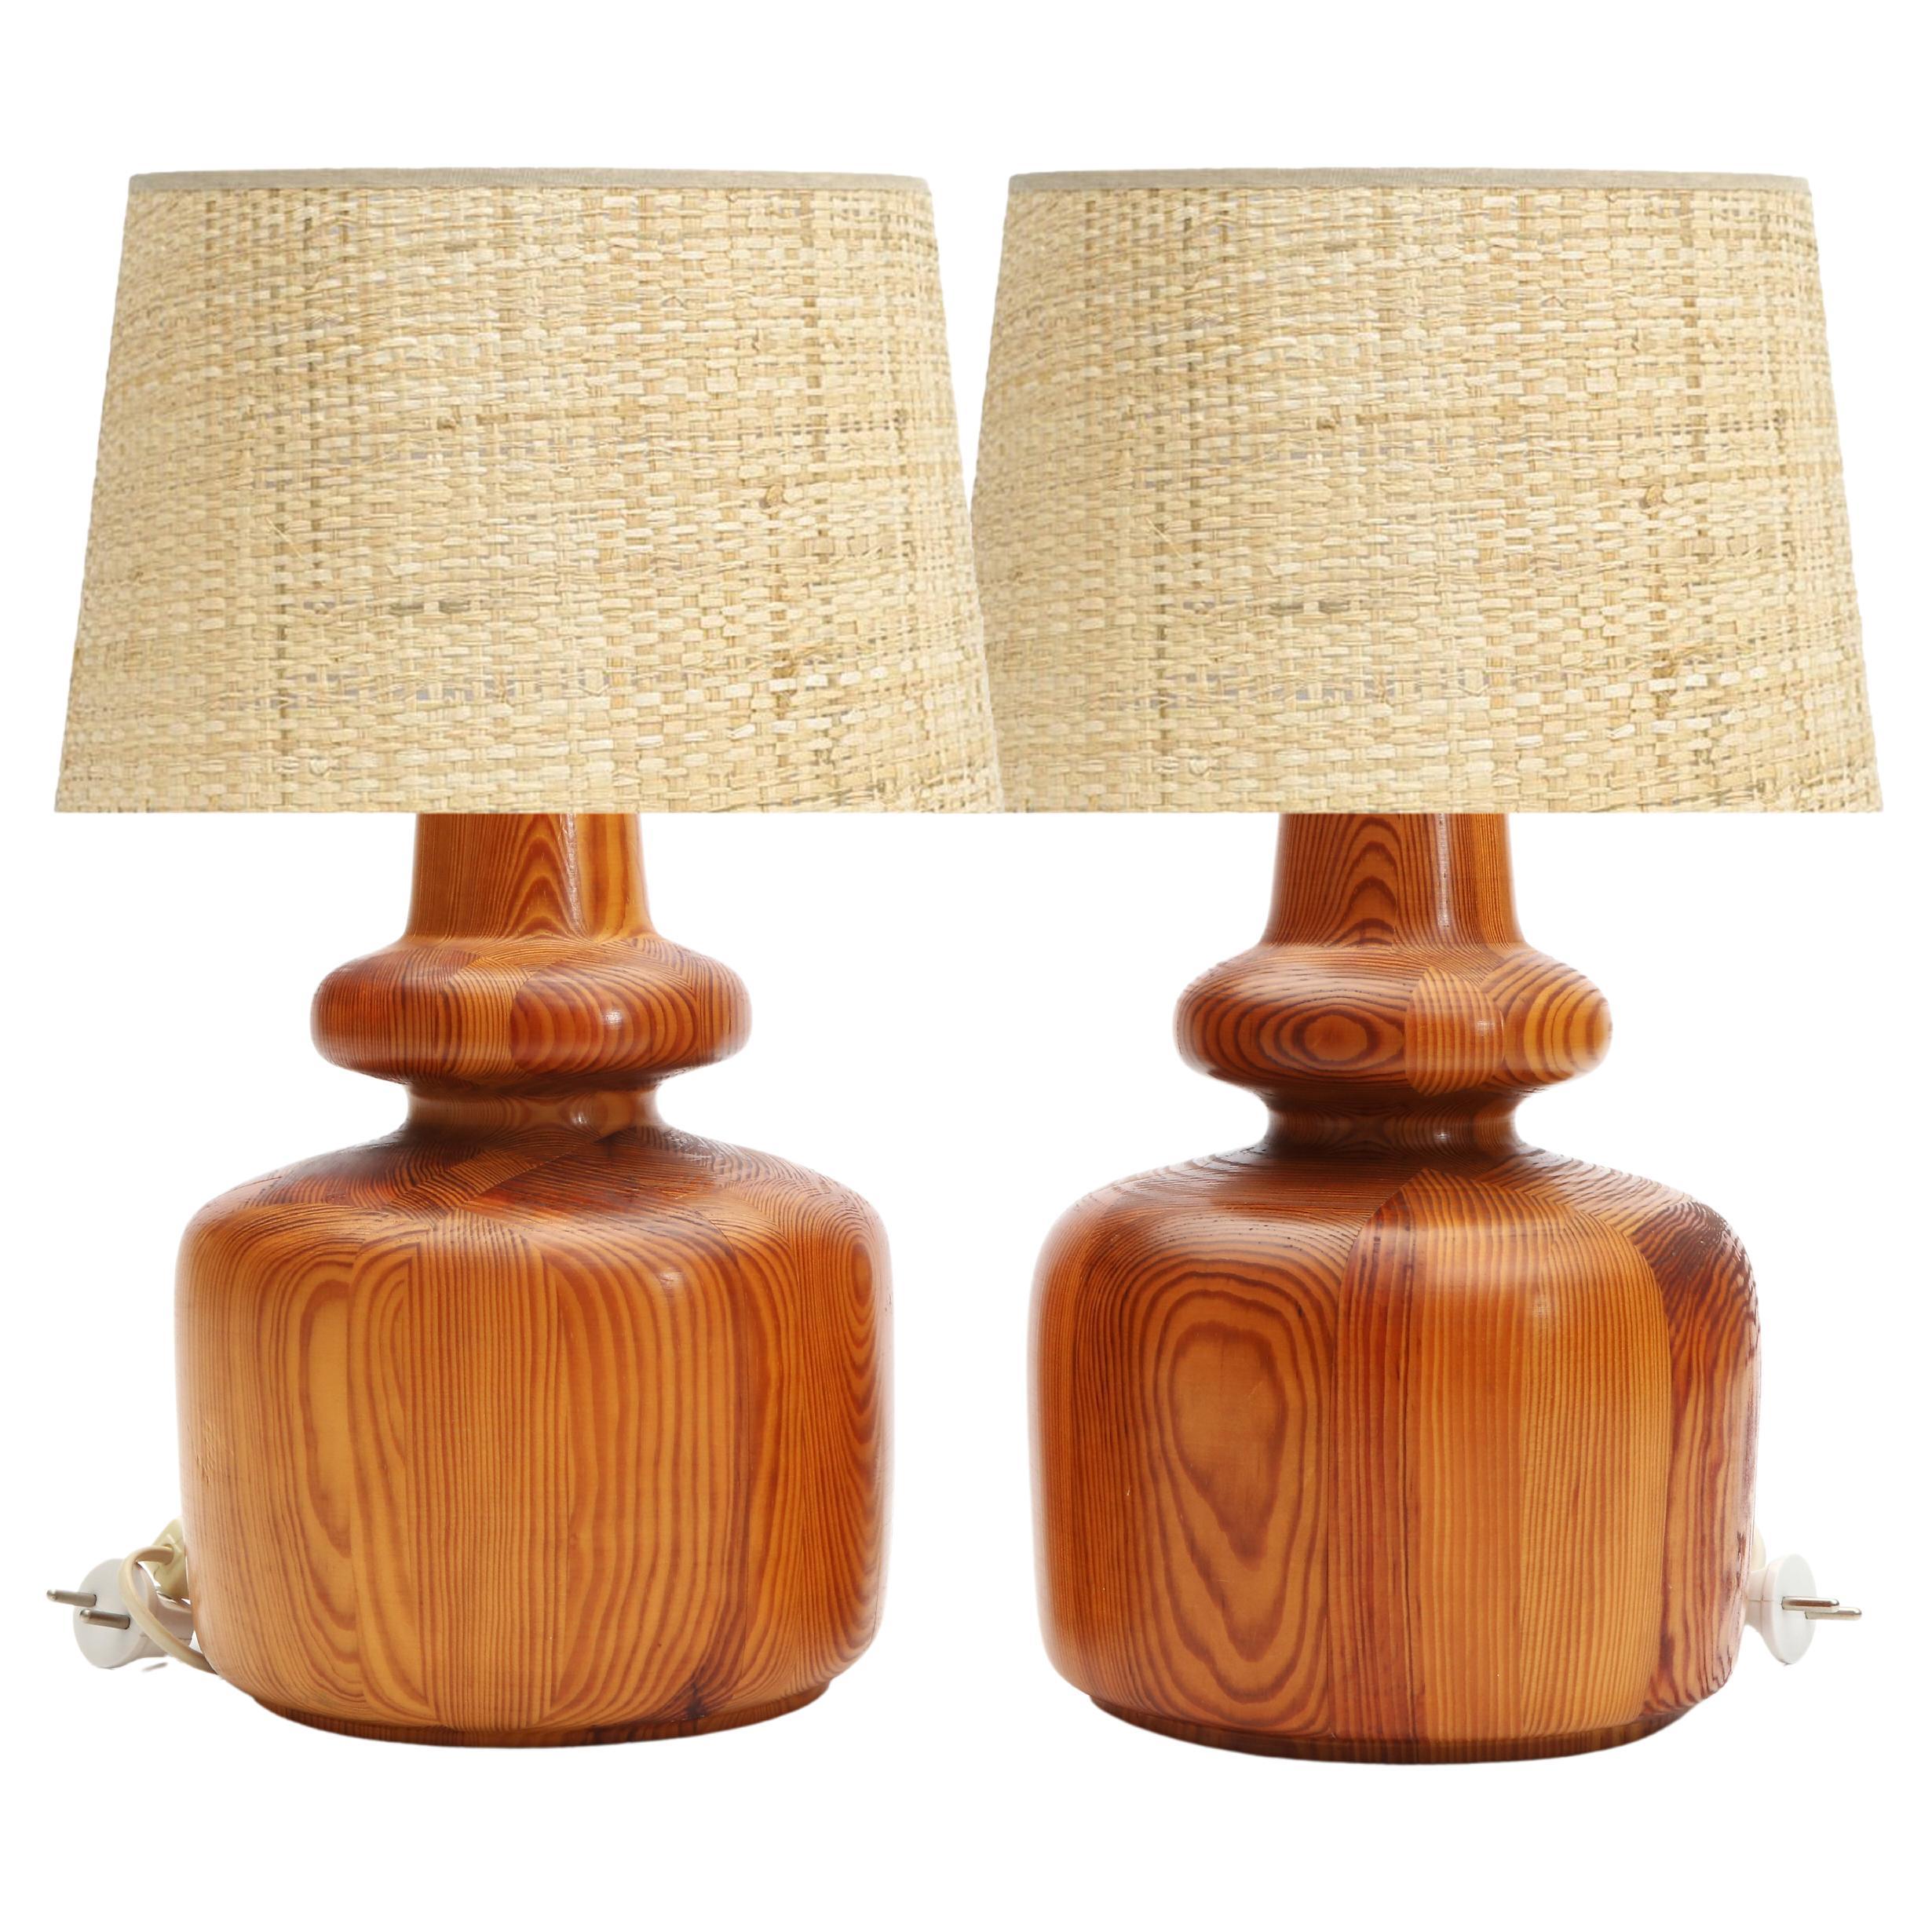 A Pair of Table Lamps in Solid Pine from Sweden, 1970s For Sale